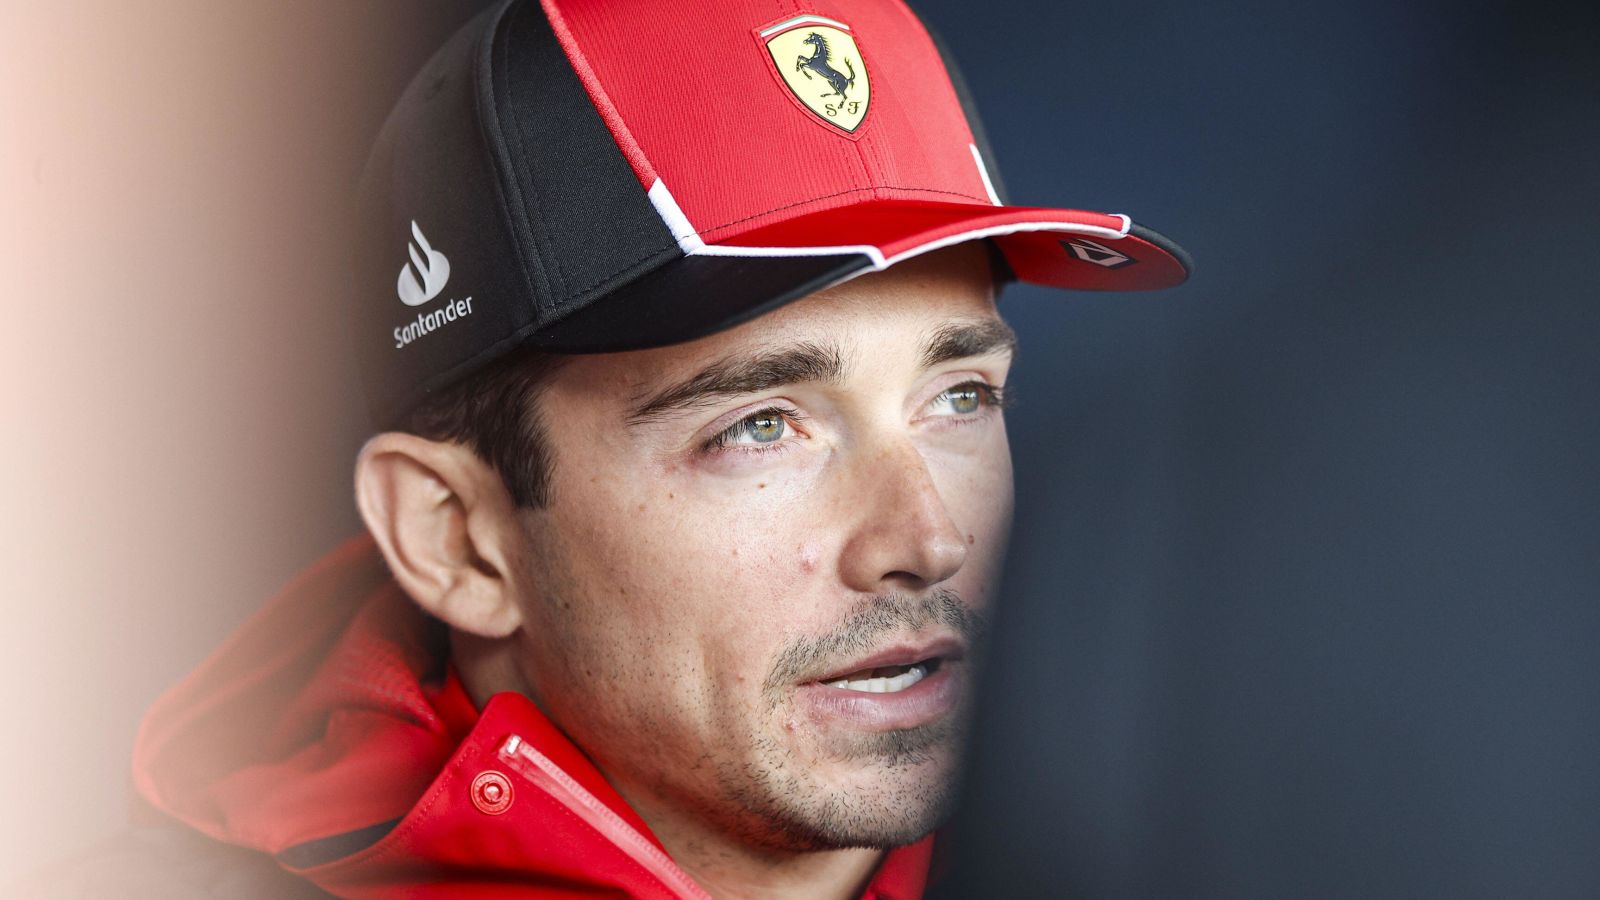 Charles Leclerc speaks to the media at the British Grand Prix. Silverstone, July 2023.